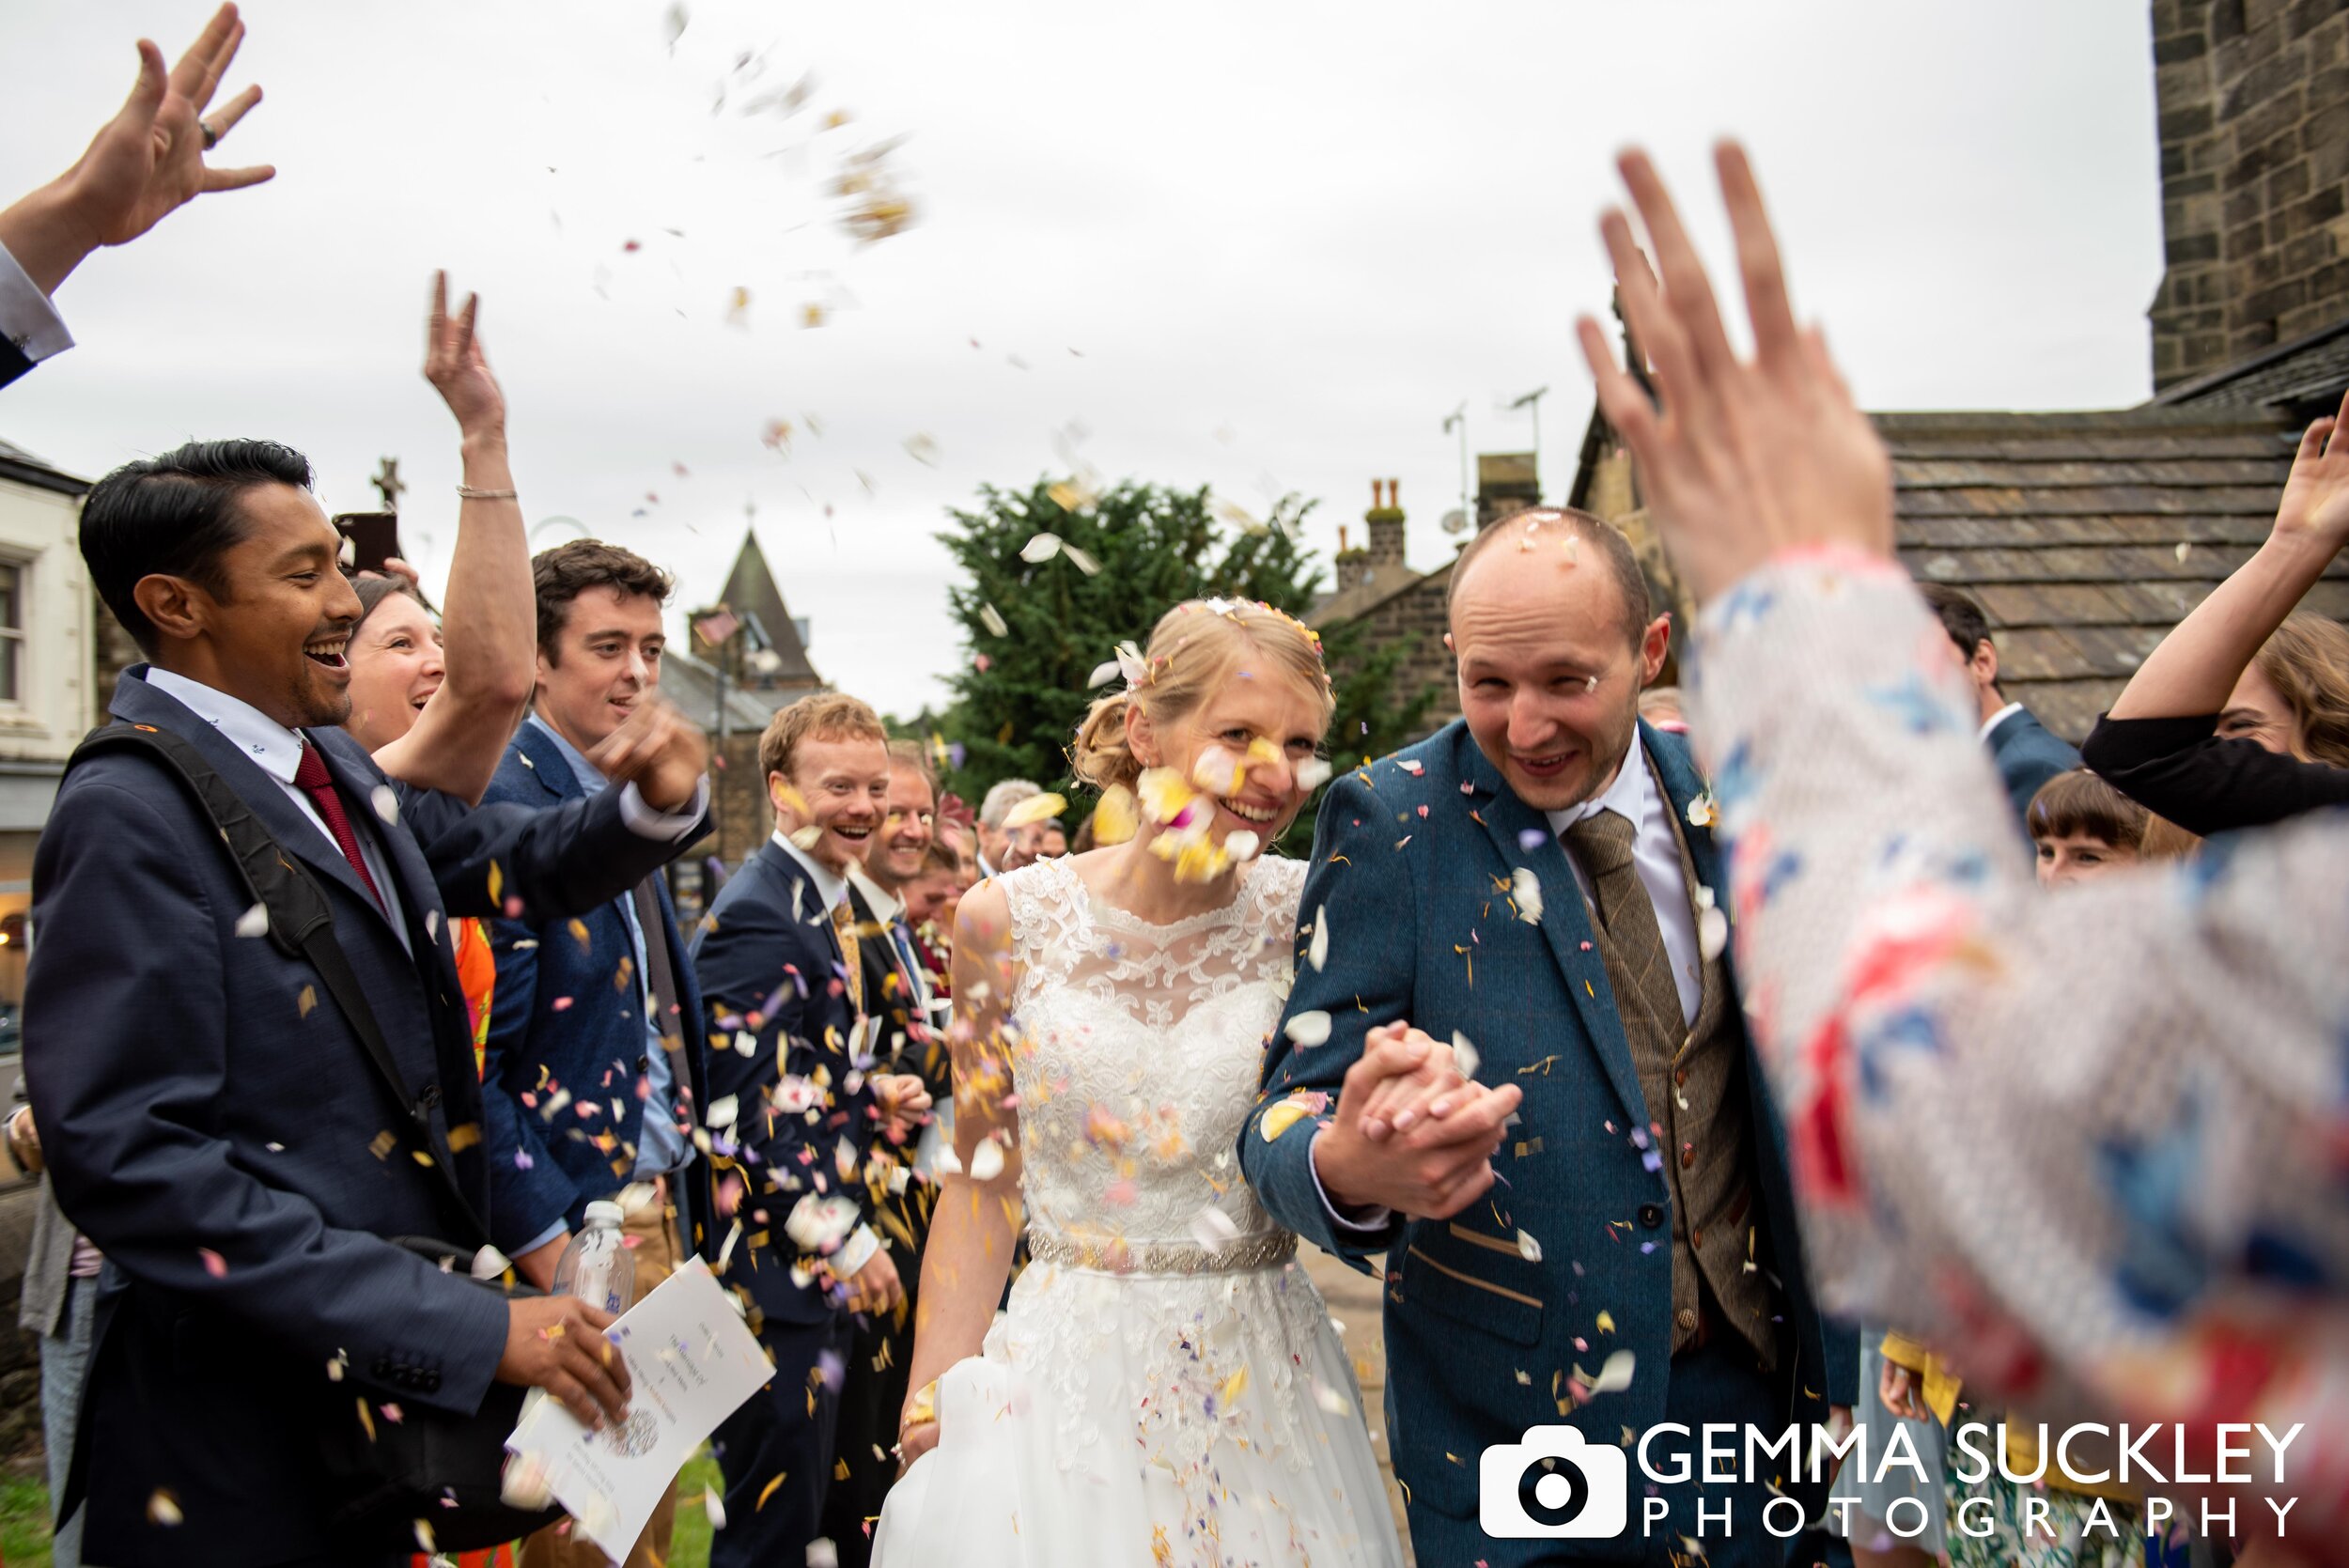 wedding guests throwing confetti at the bride and groom